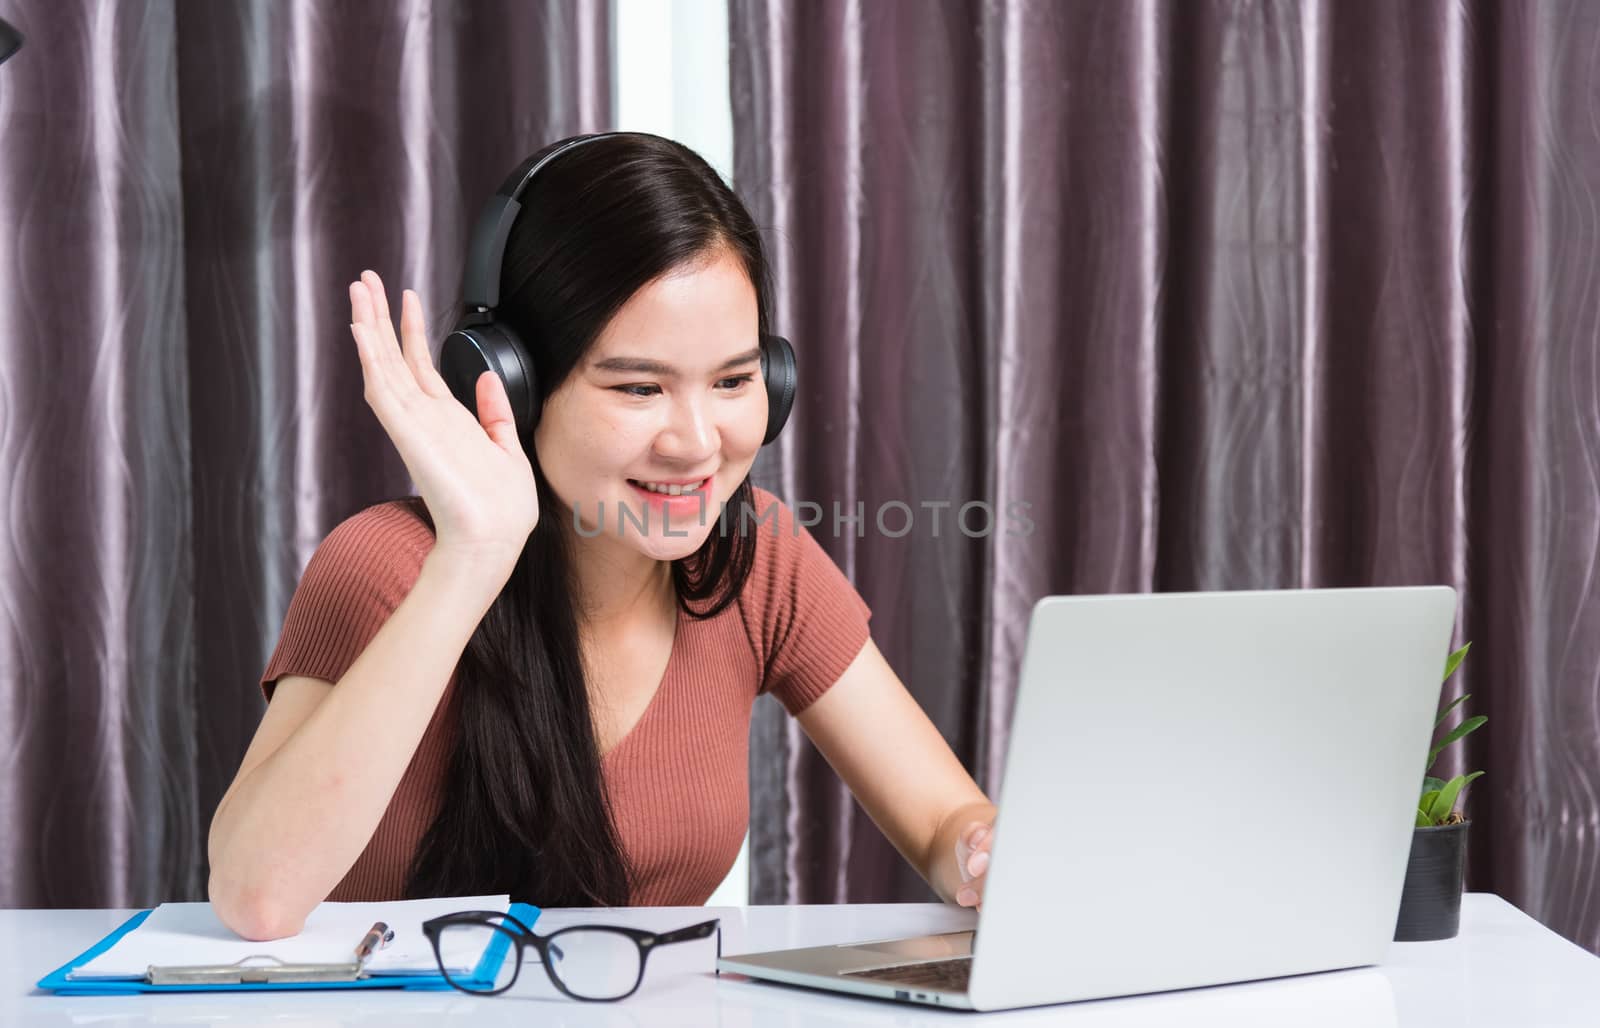 Work from home, Smiling Happy Asian business young beautiful woman sitting on desk workspace wearing headphones video call conference with laptop computer raise hand saying hi team at home office